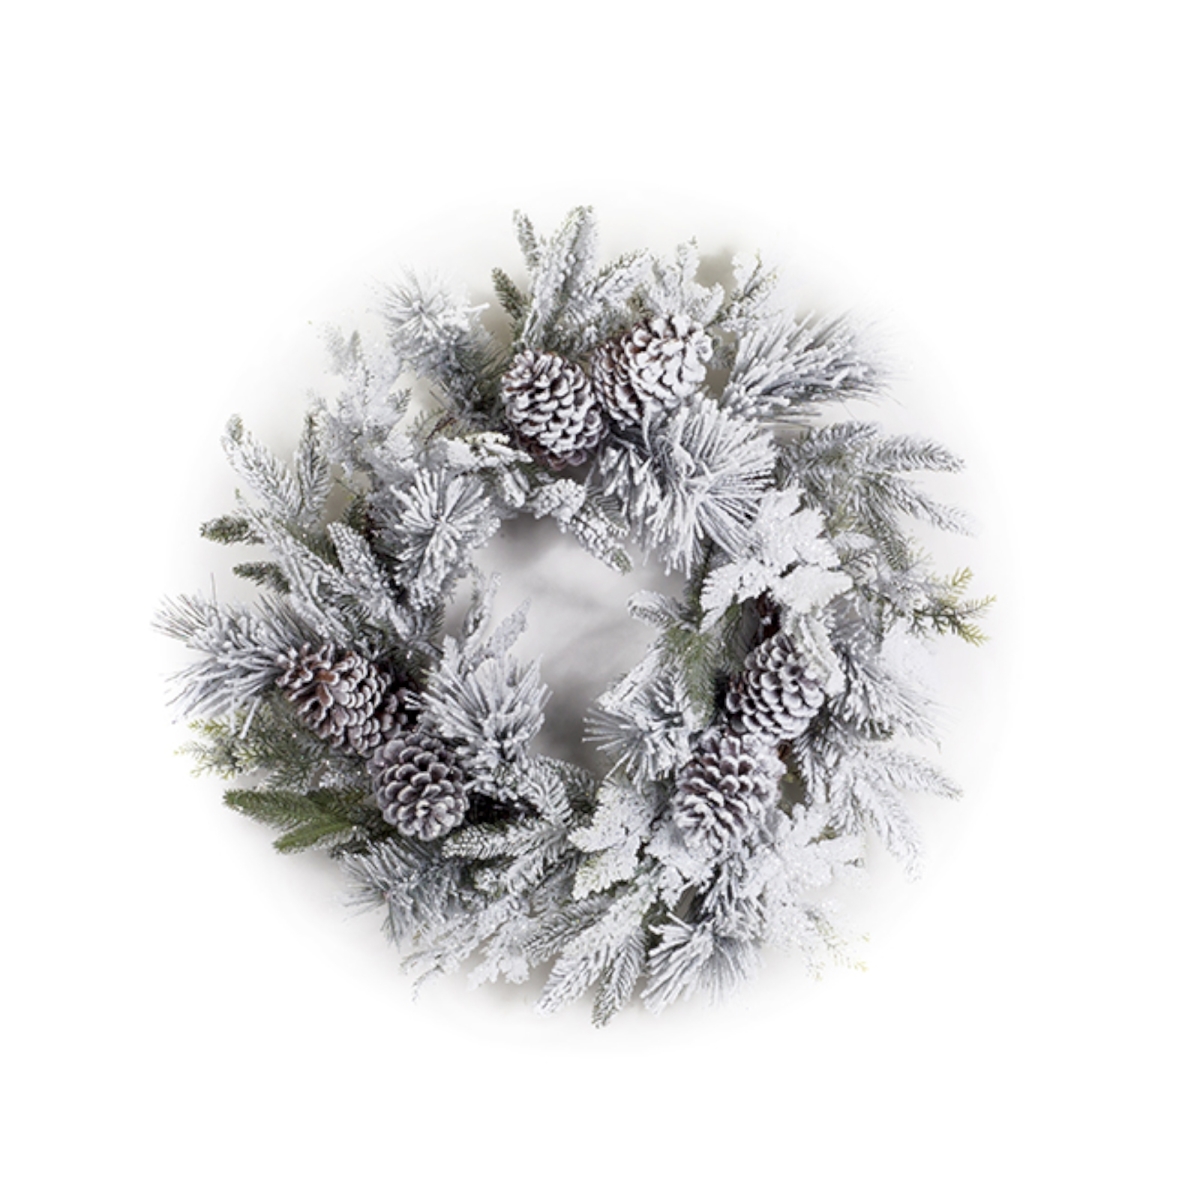 73056ds 28.5 In. Flocked Pine Wreath Pvc - White & Green